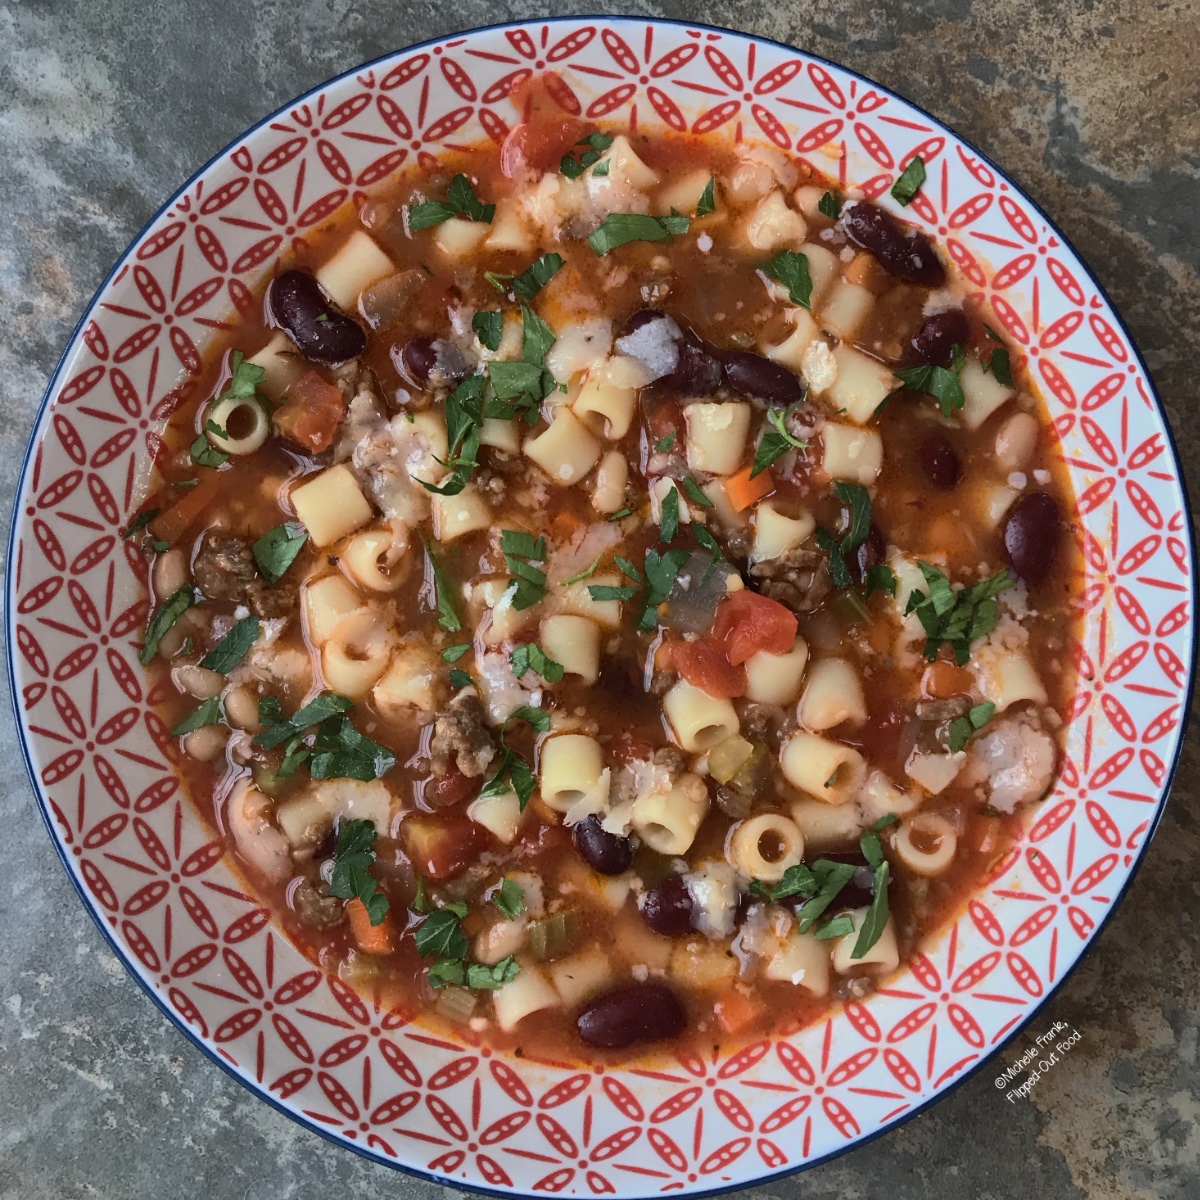 Easy Soups for Fall: Easy Pasta Fagioli soup in a red and white bowl.